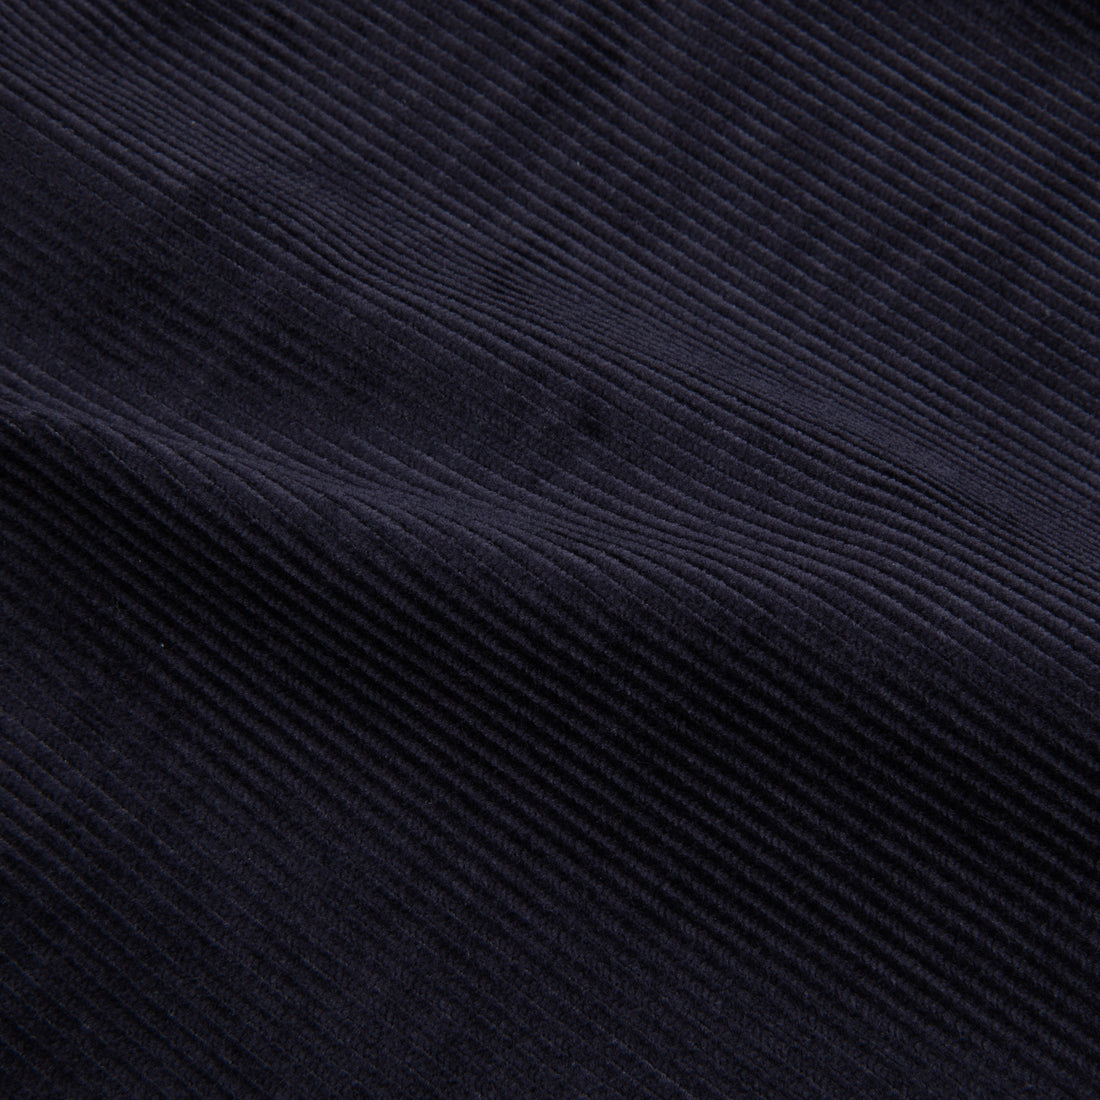 Orslow 107 Ivy Fit Corduroy Navy